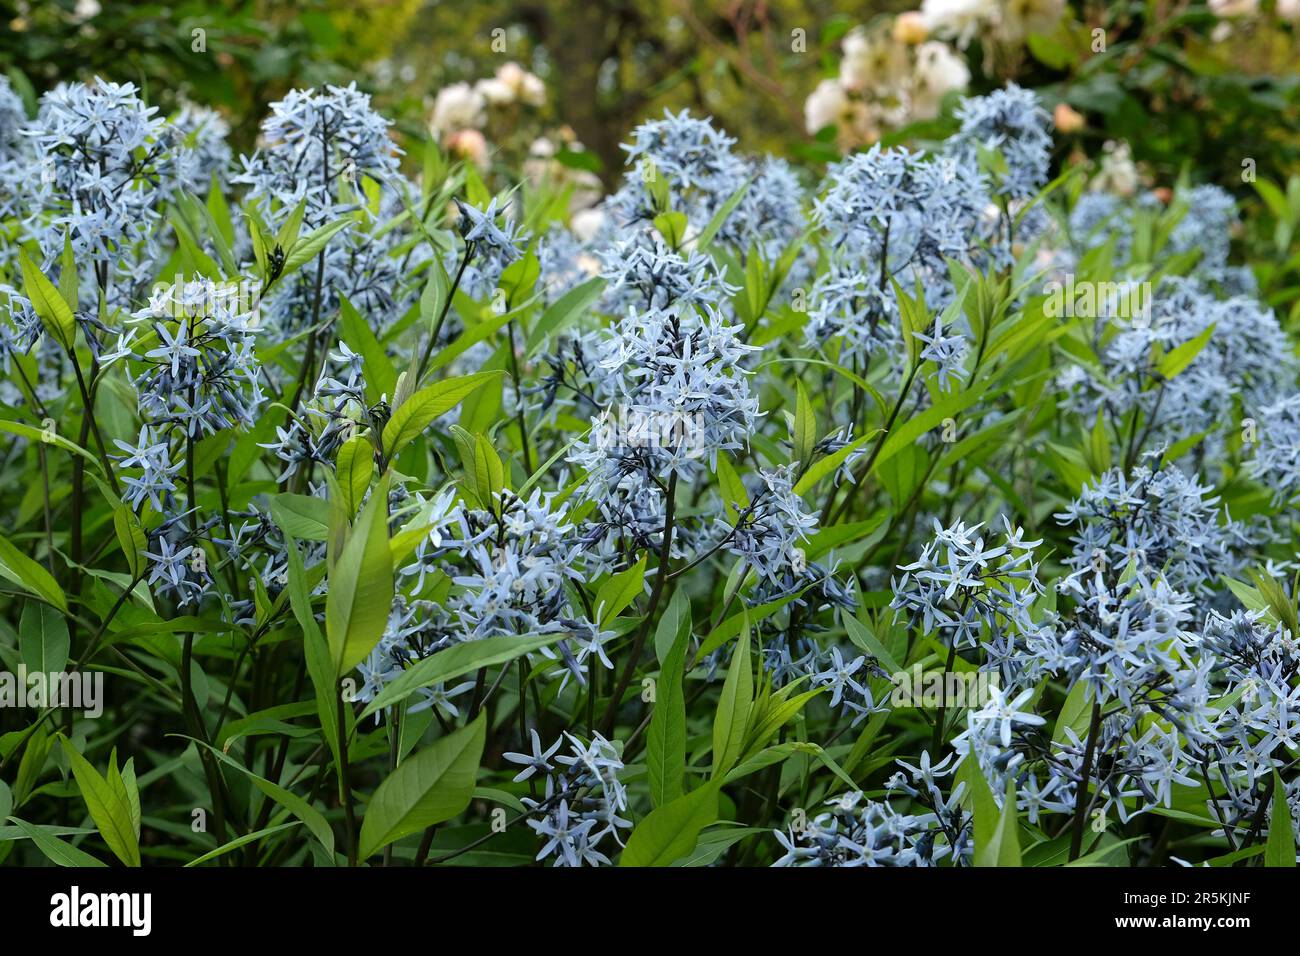 Amsonia orientalis, also known as Blue Star, in flower. Stock Photo